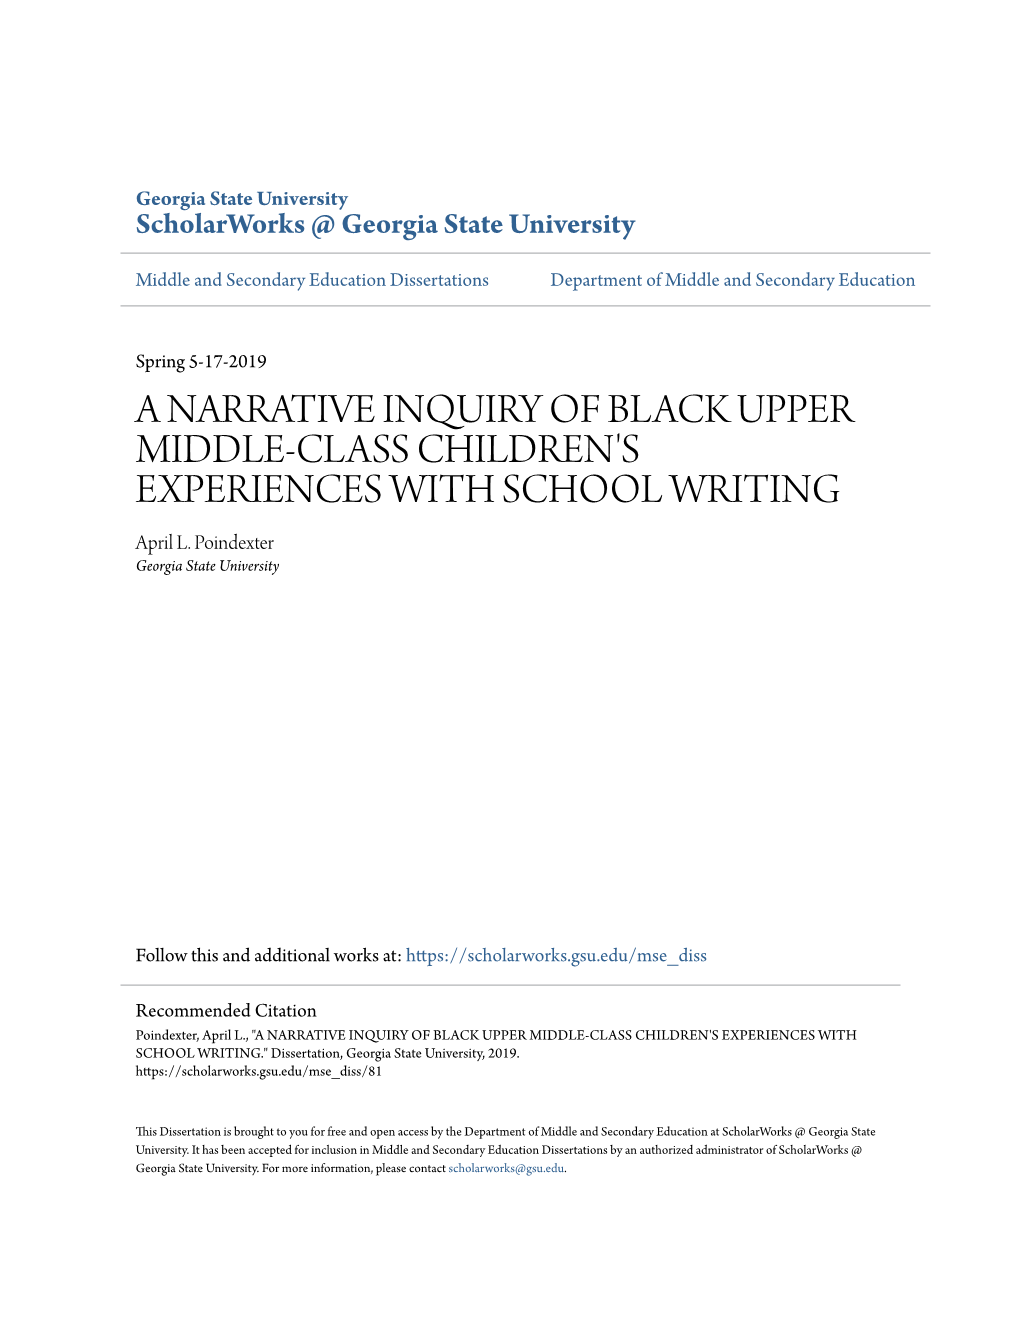 A NARRATIVE INQUIRY of BLACK UPPER MIDDLE-CLASS CHILDREN's EXPERIENCES with SCHOOL WRITING April L